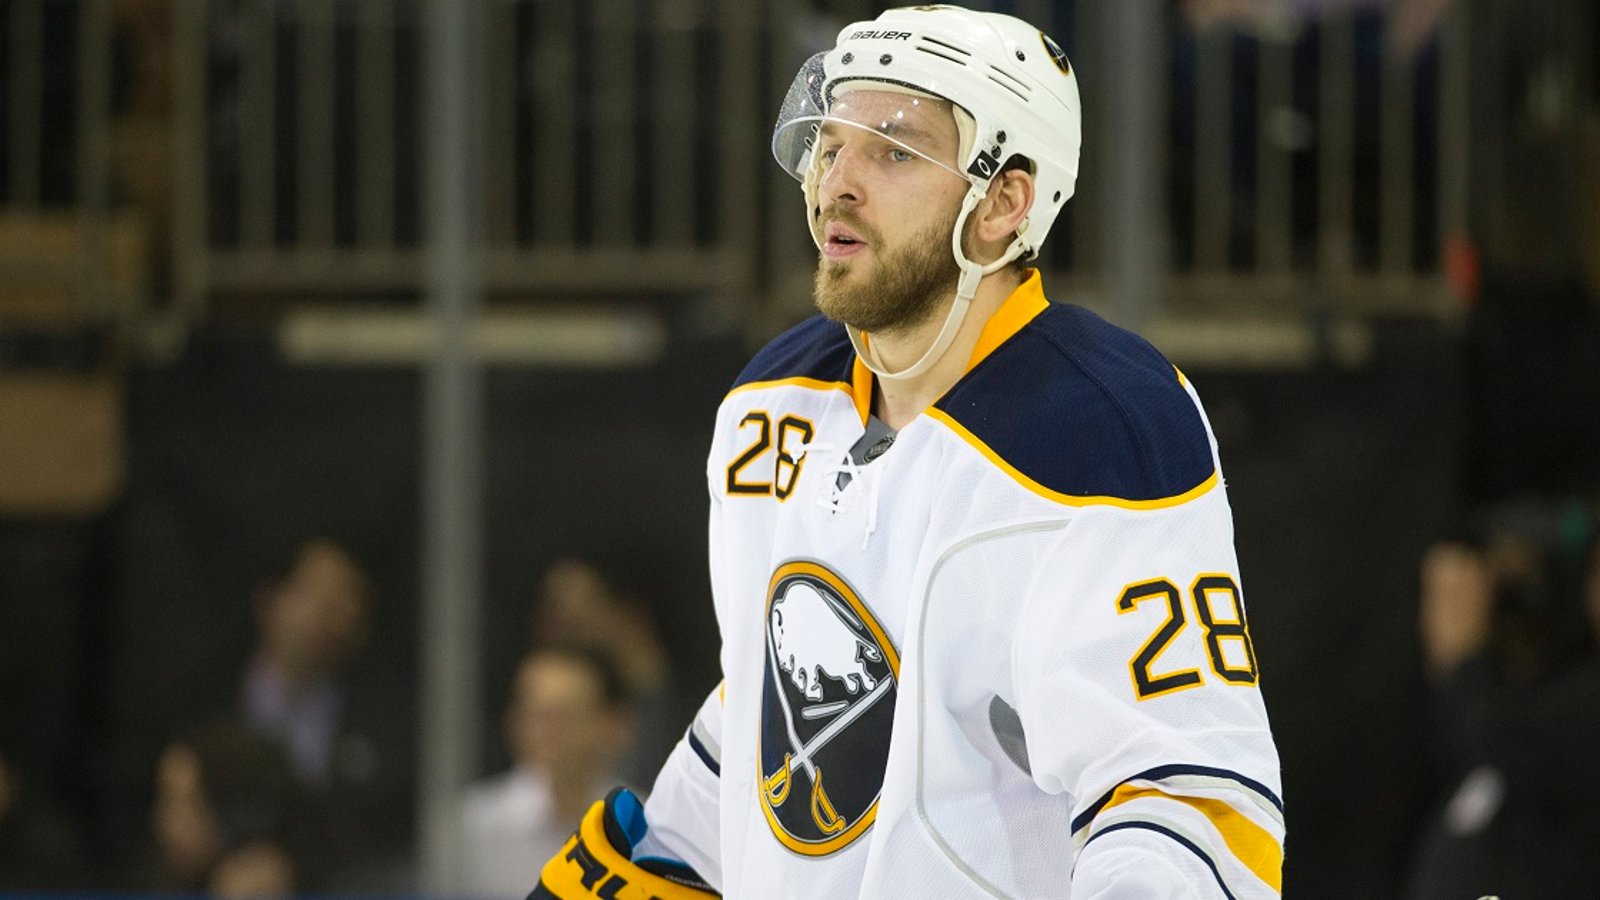 Free agent Zemgus Girgensons signs multi-year deal.